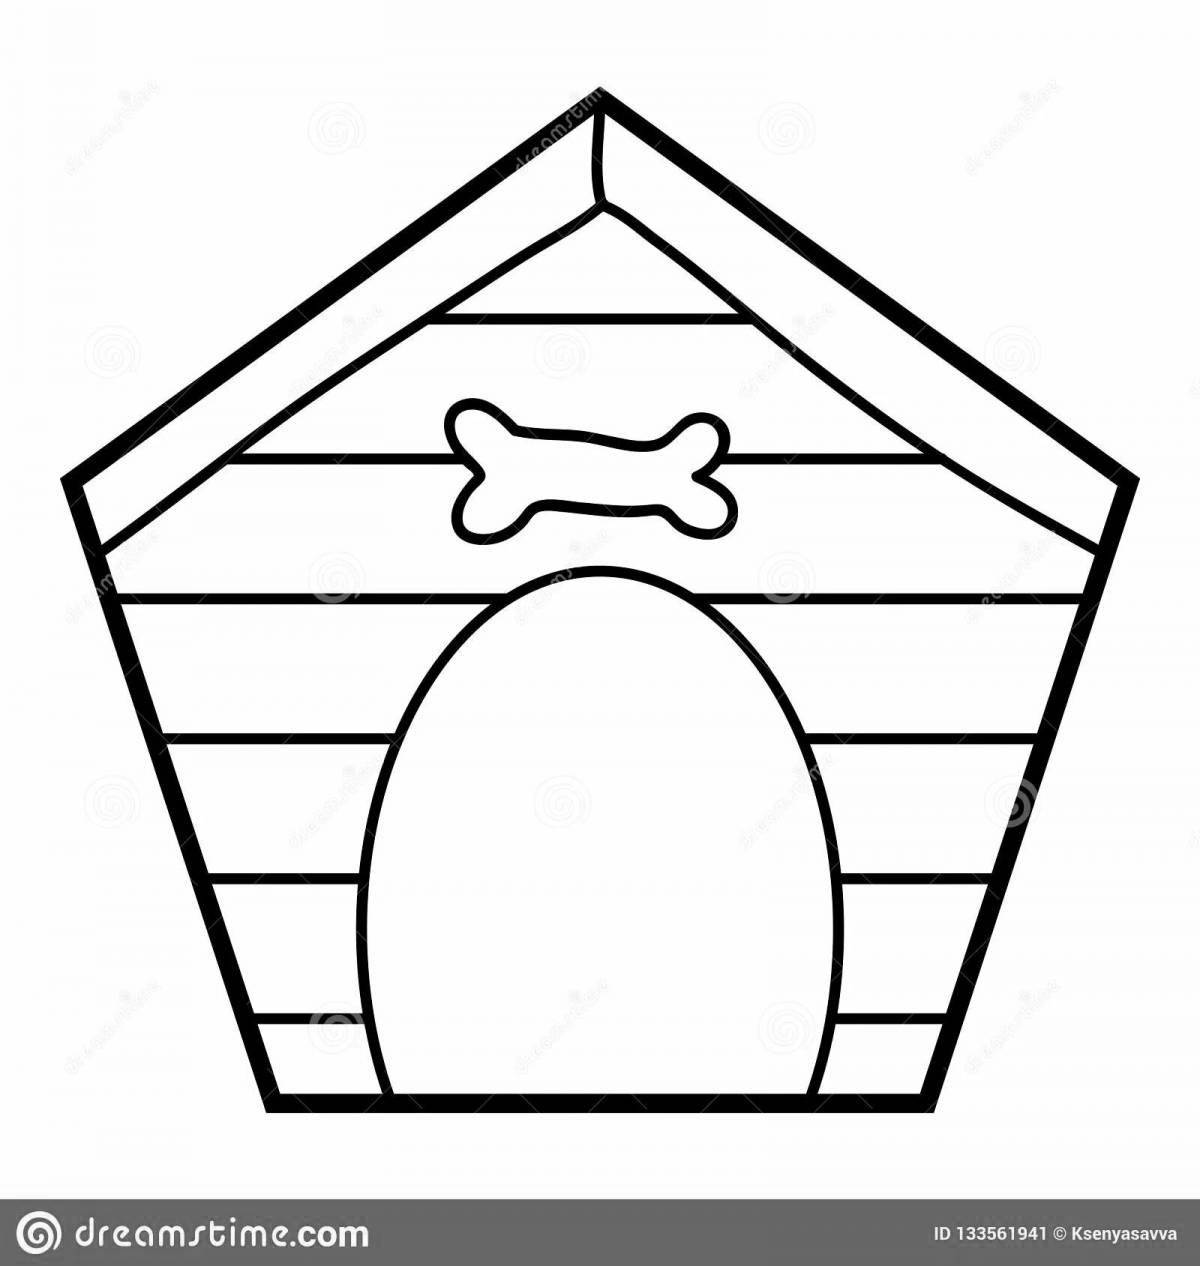 Colourful dog house coloring book for kids